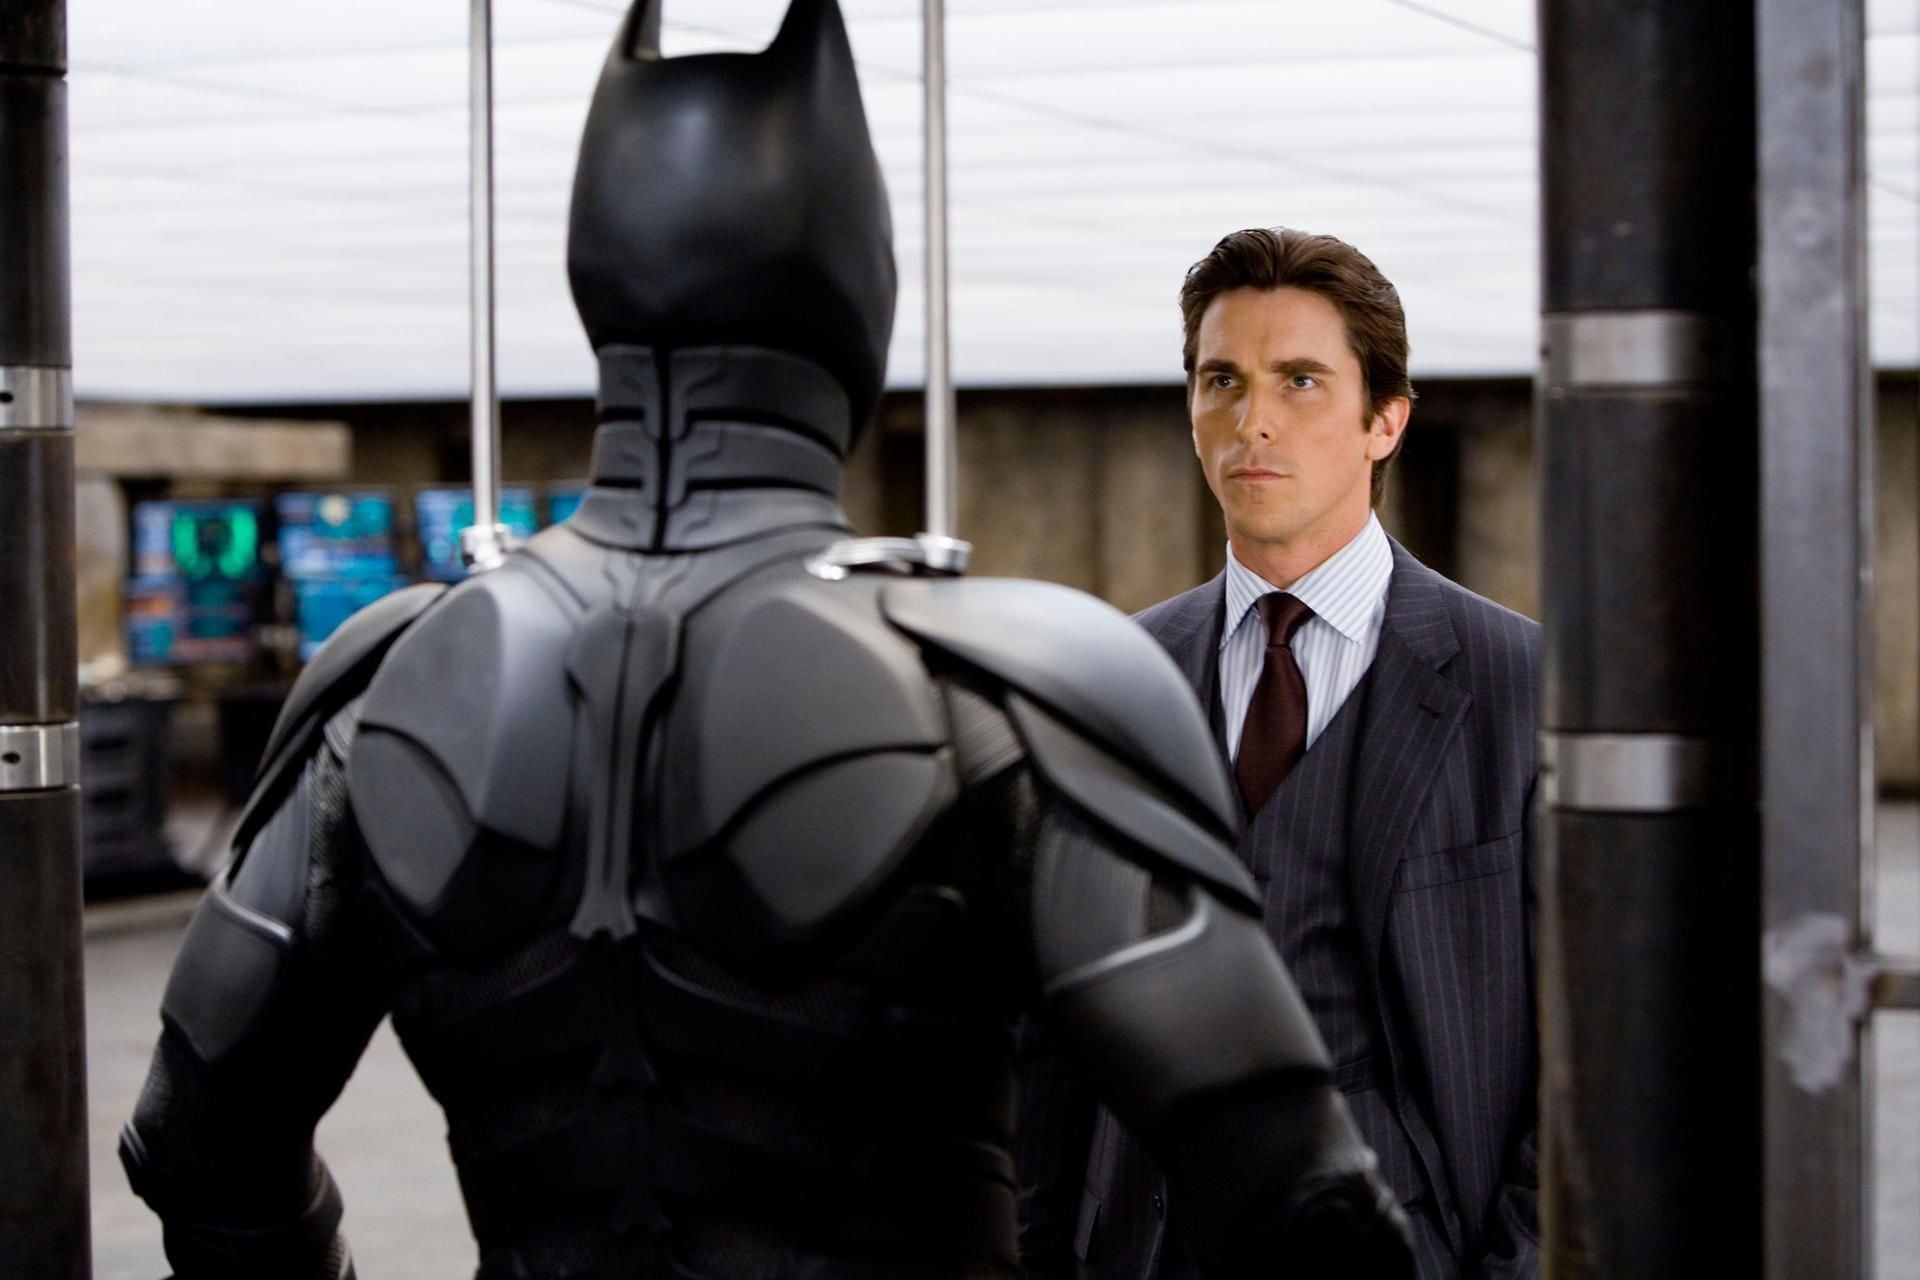 Why 'The Dark Knight' was a game-changing superhero film